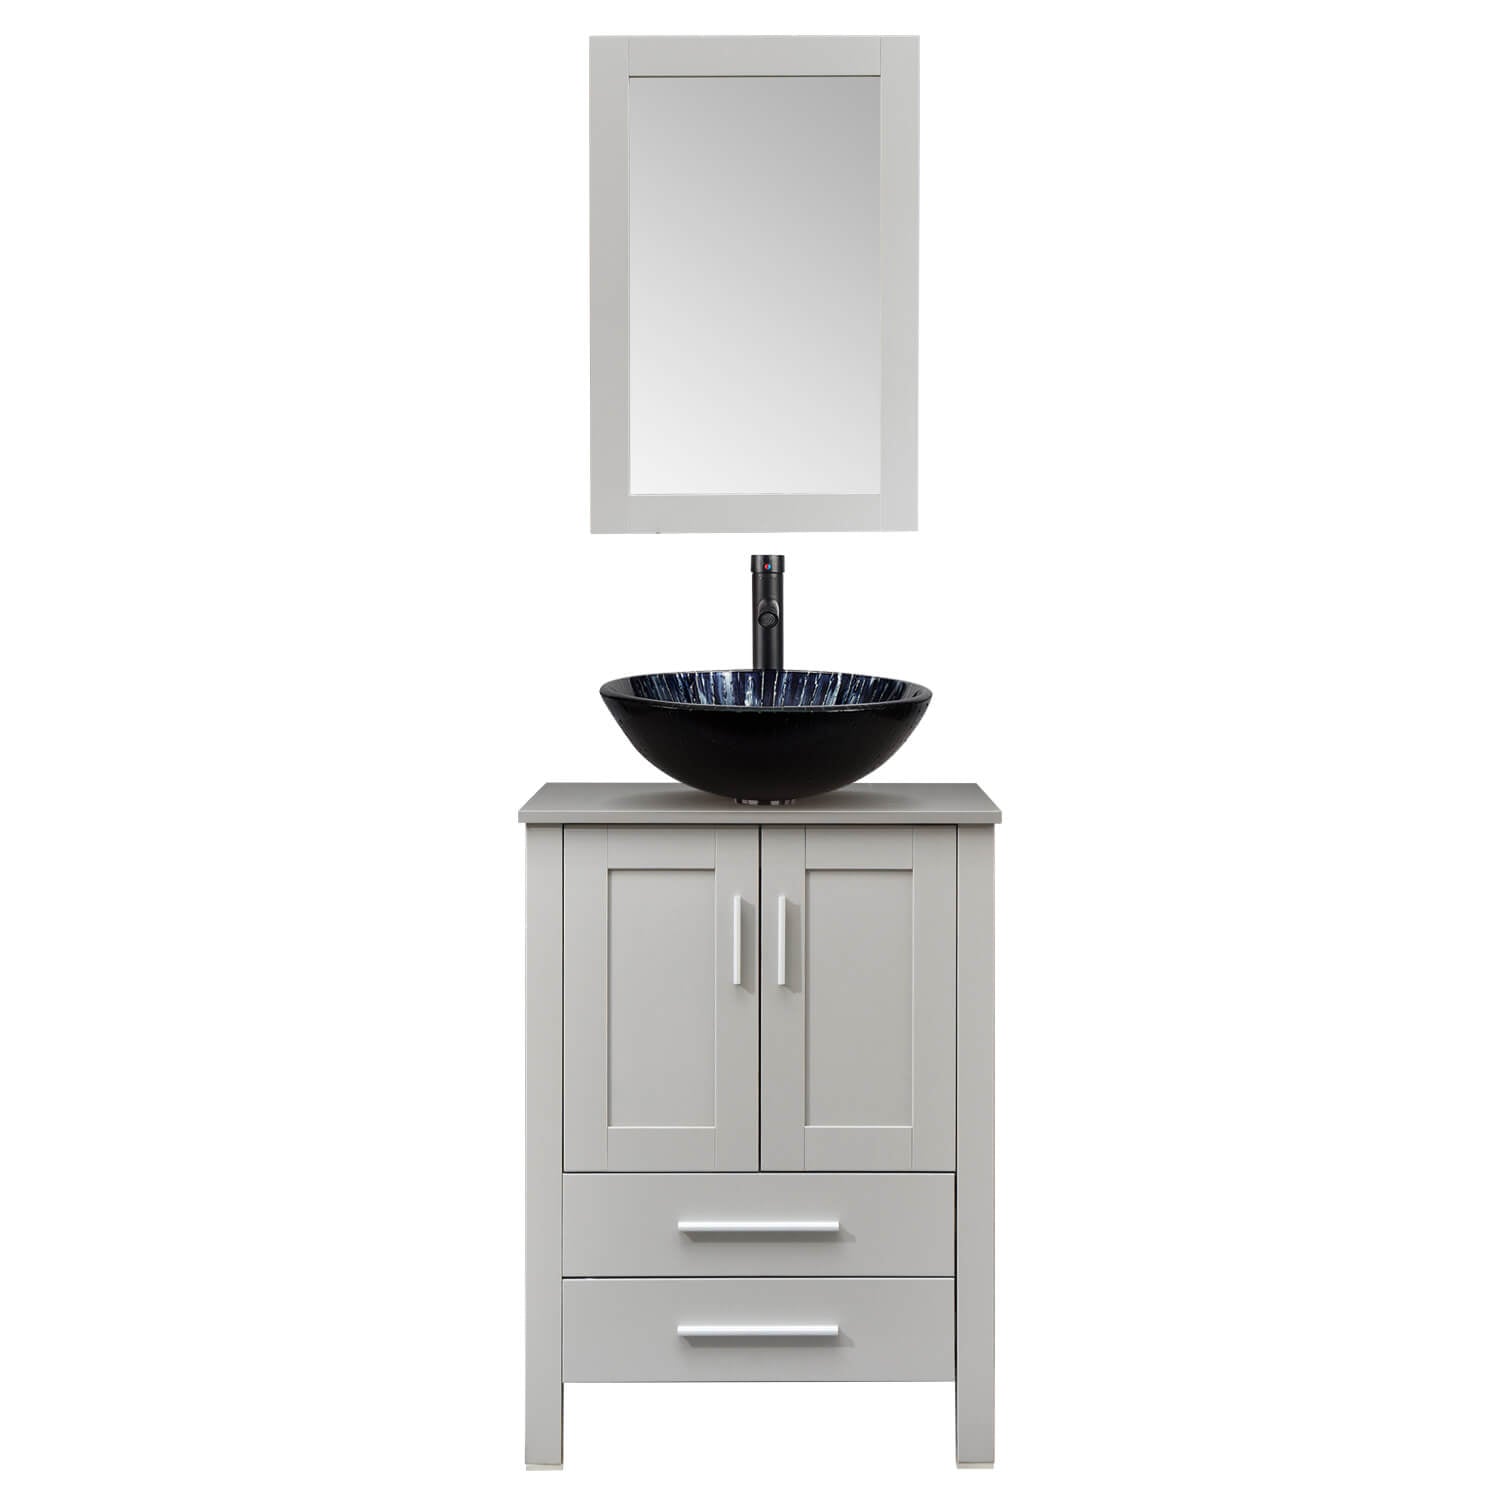 Elecwish gray wood bathroom vanity with patterened round sink in white background